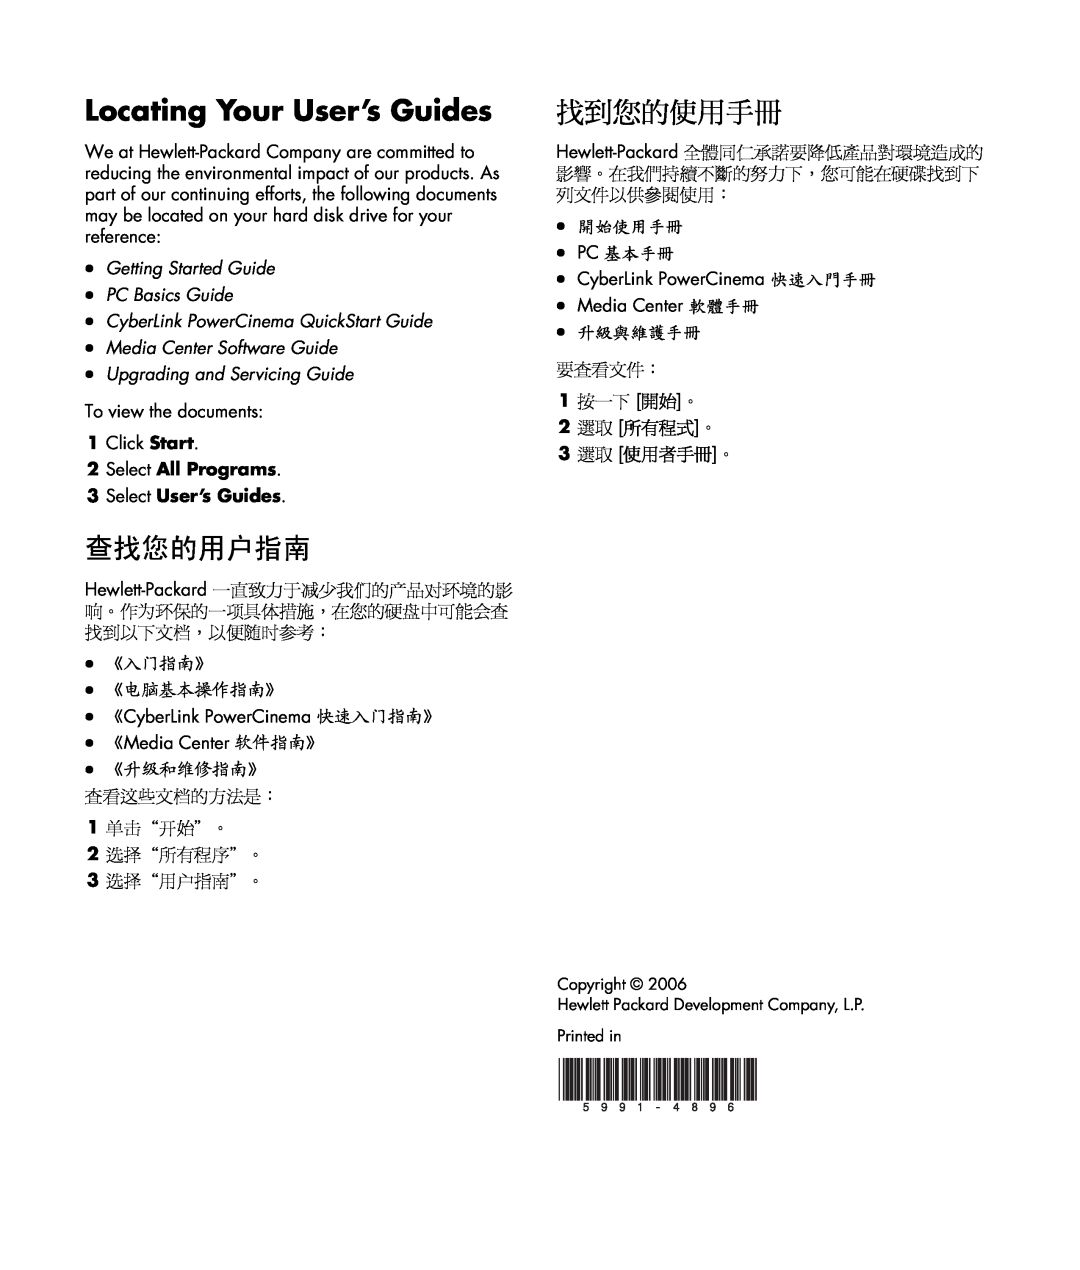 HP a1590tw manual Locating Your User’s Guides, 查找您的用户指南, 找到您的使用手冊, Getting Started Guide PC Basics Guide, 3 選取 使用者手冊。 